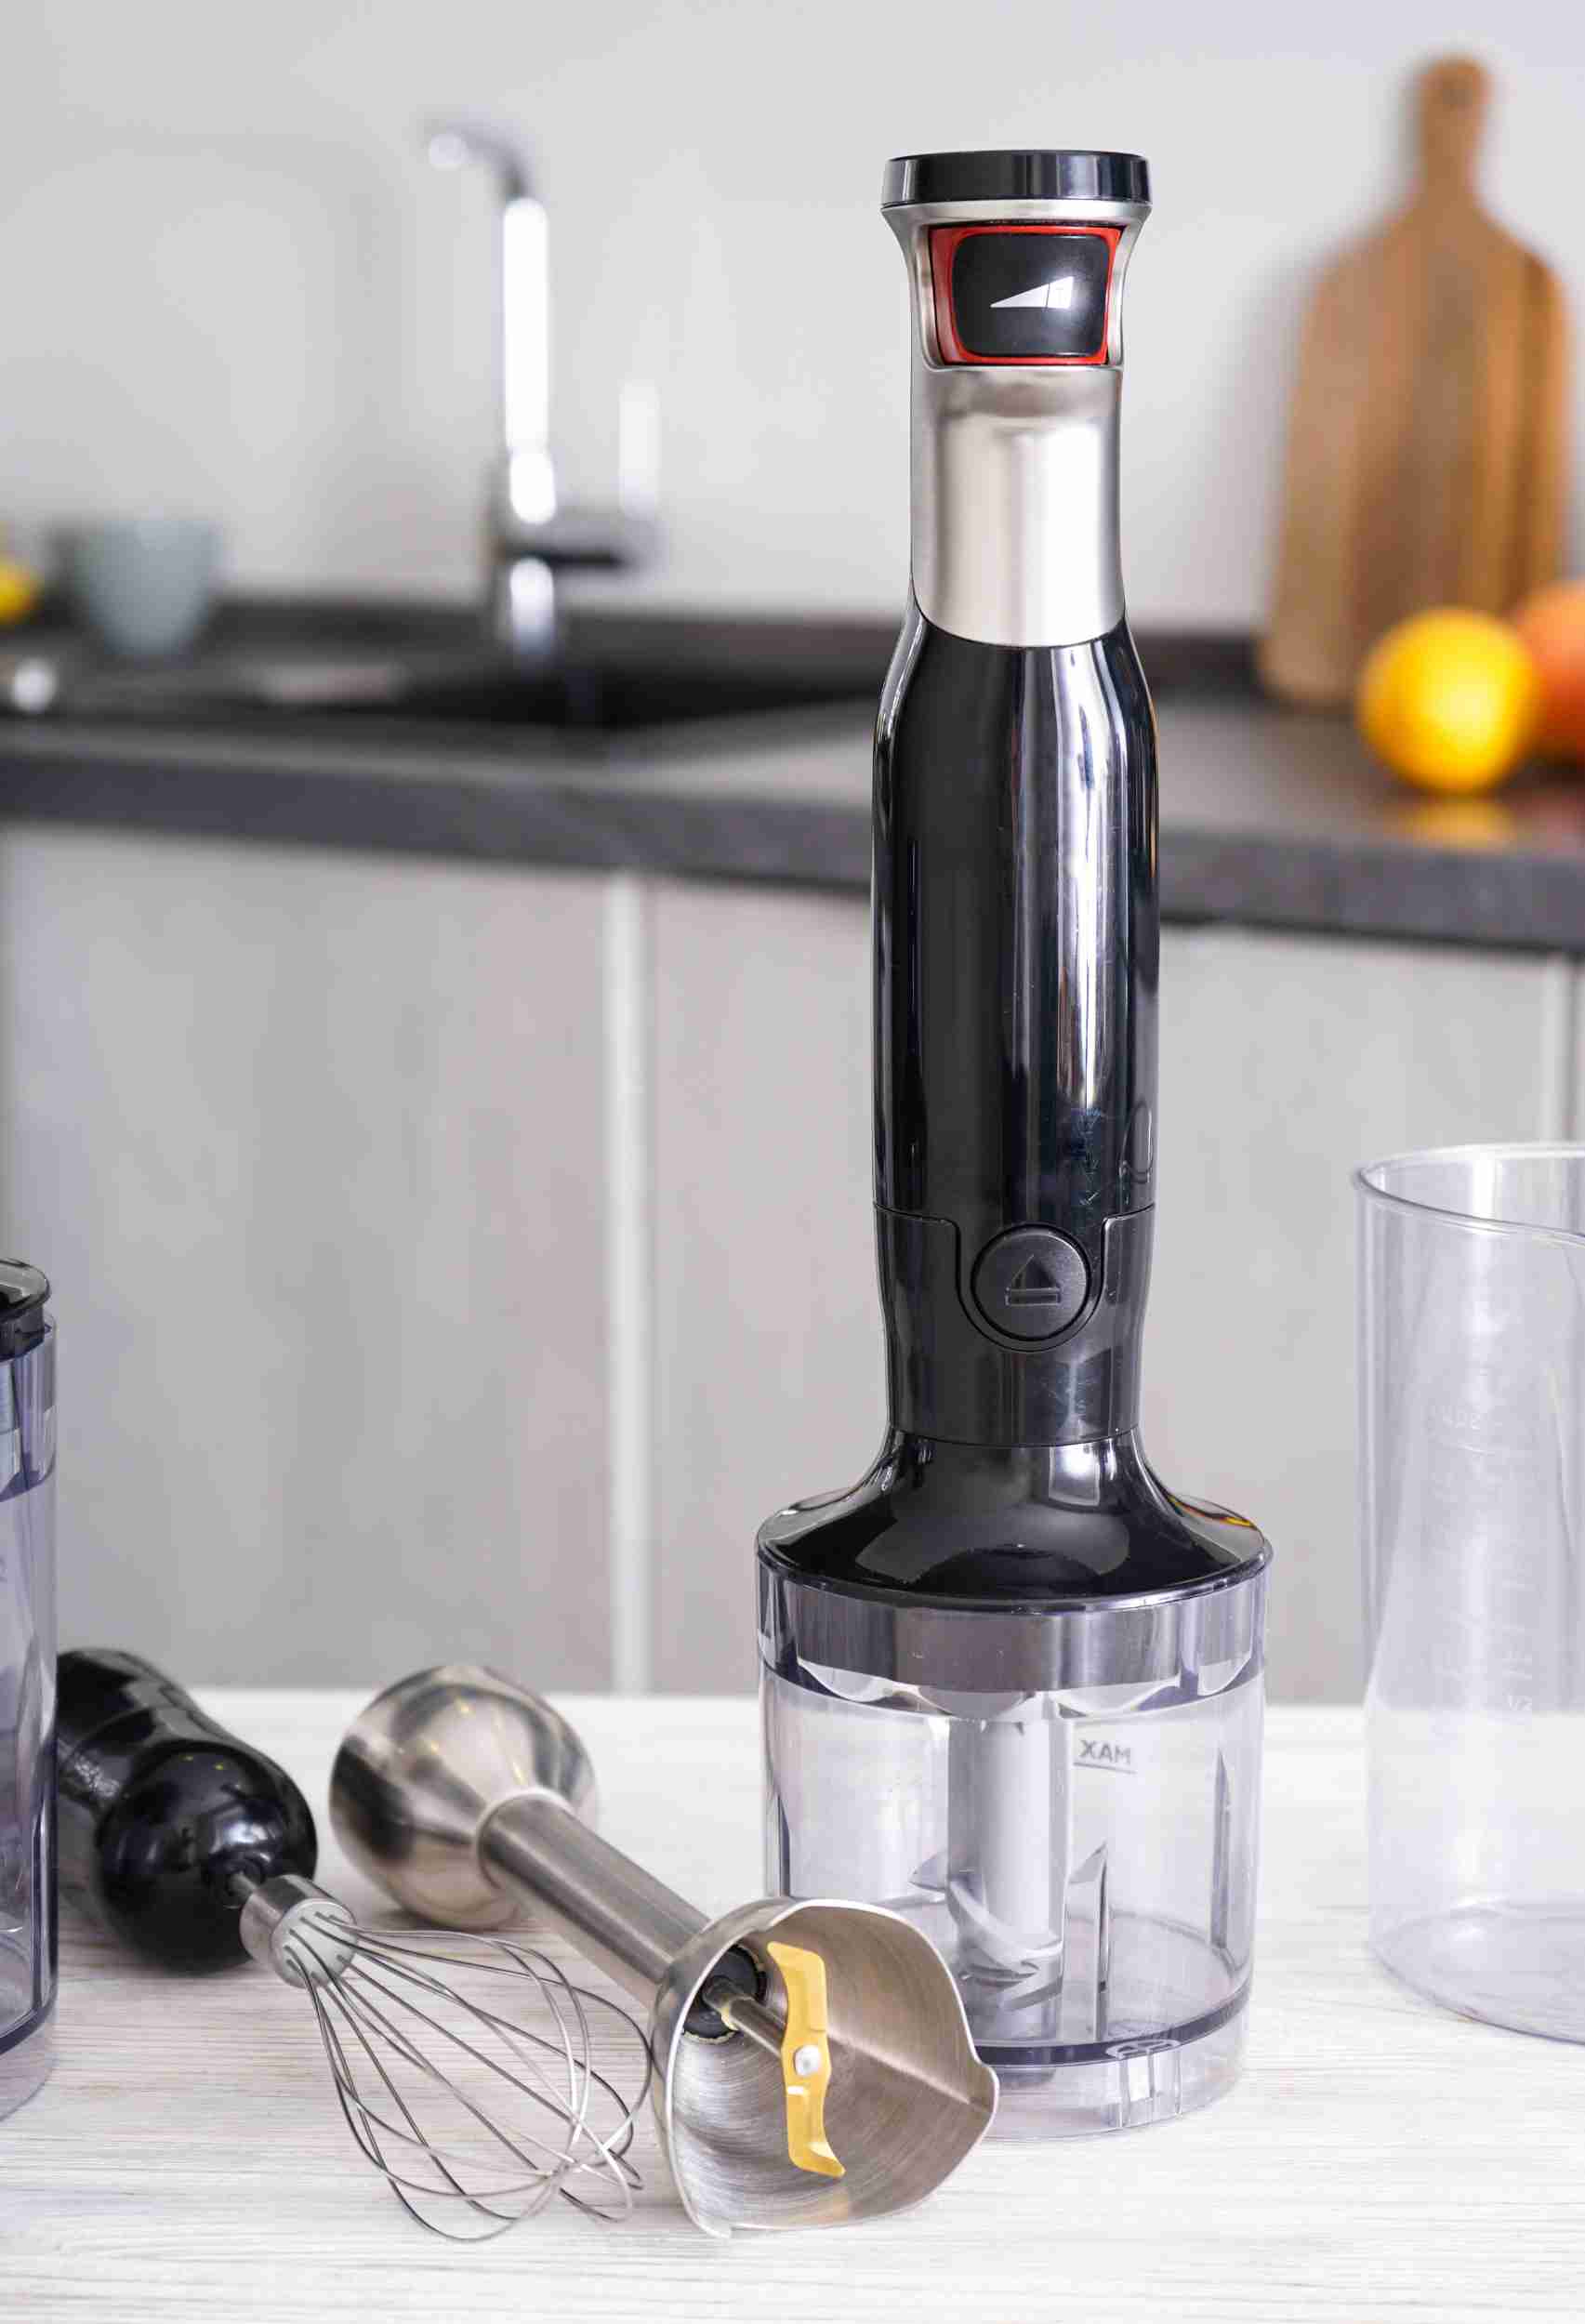 5 Tips To Get The Most Out of Your Immersion Blender